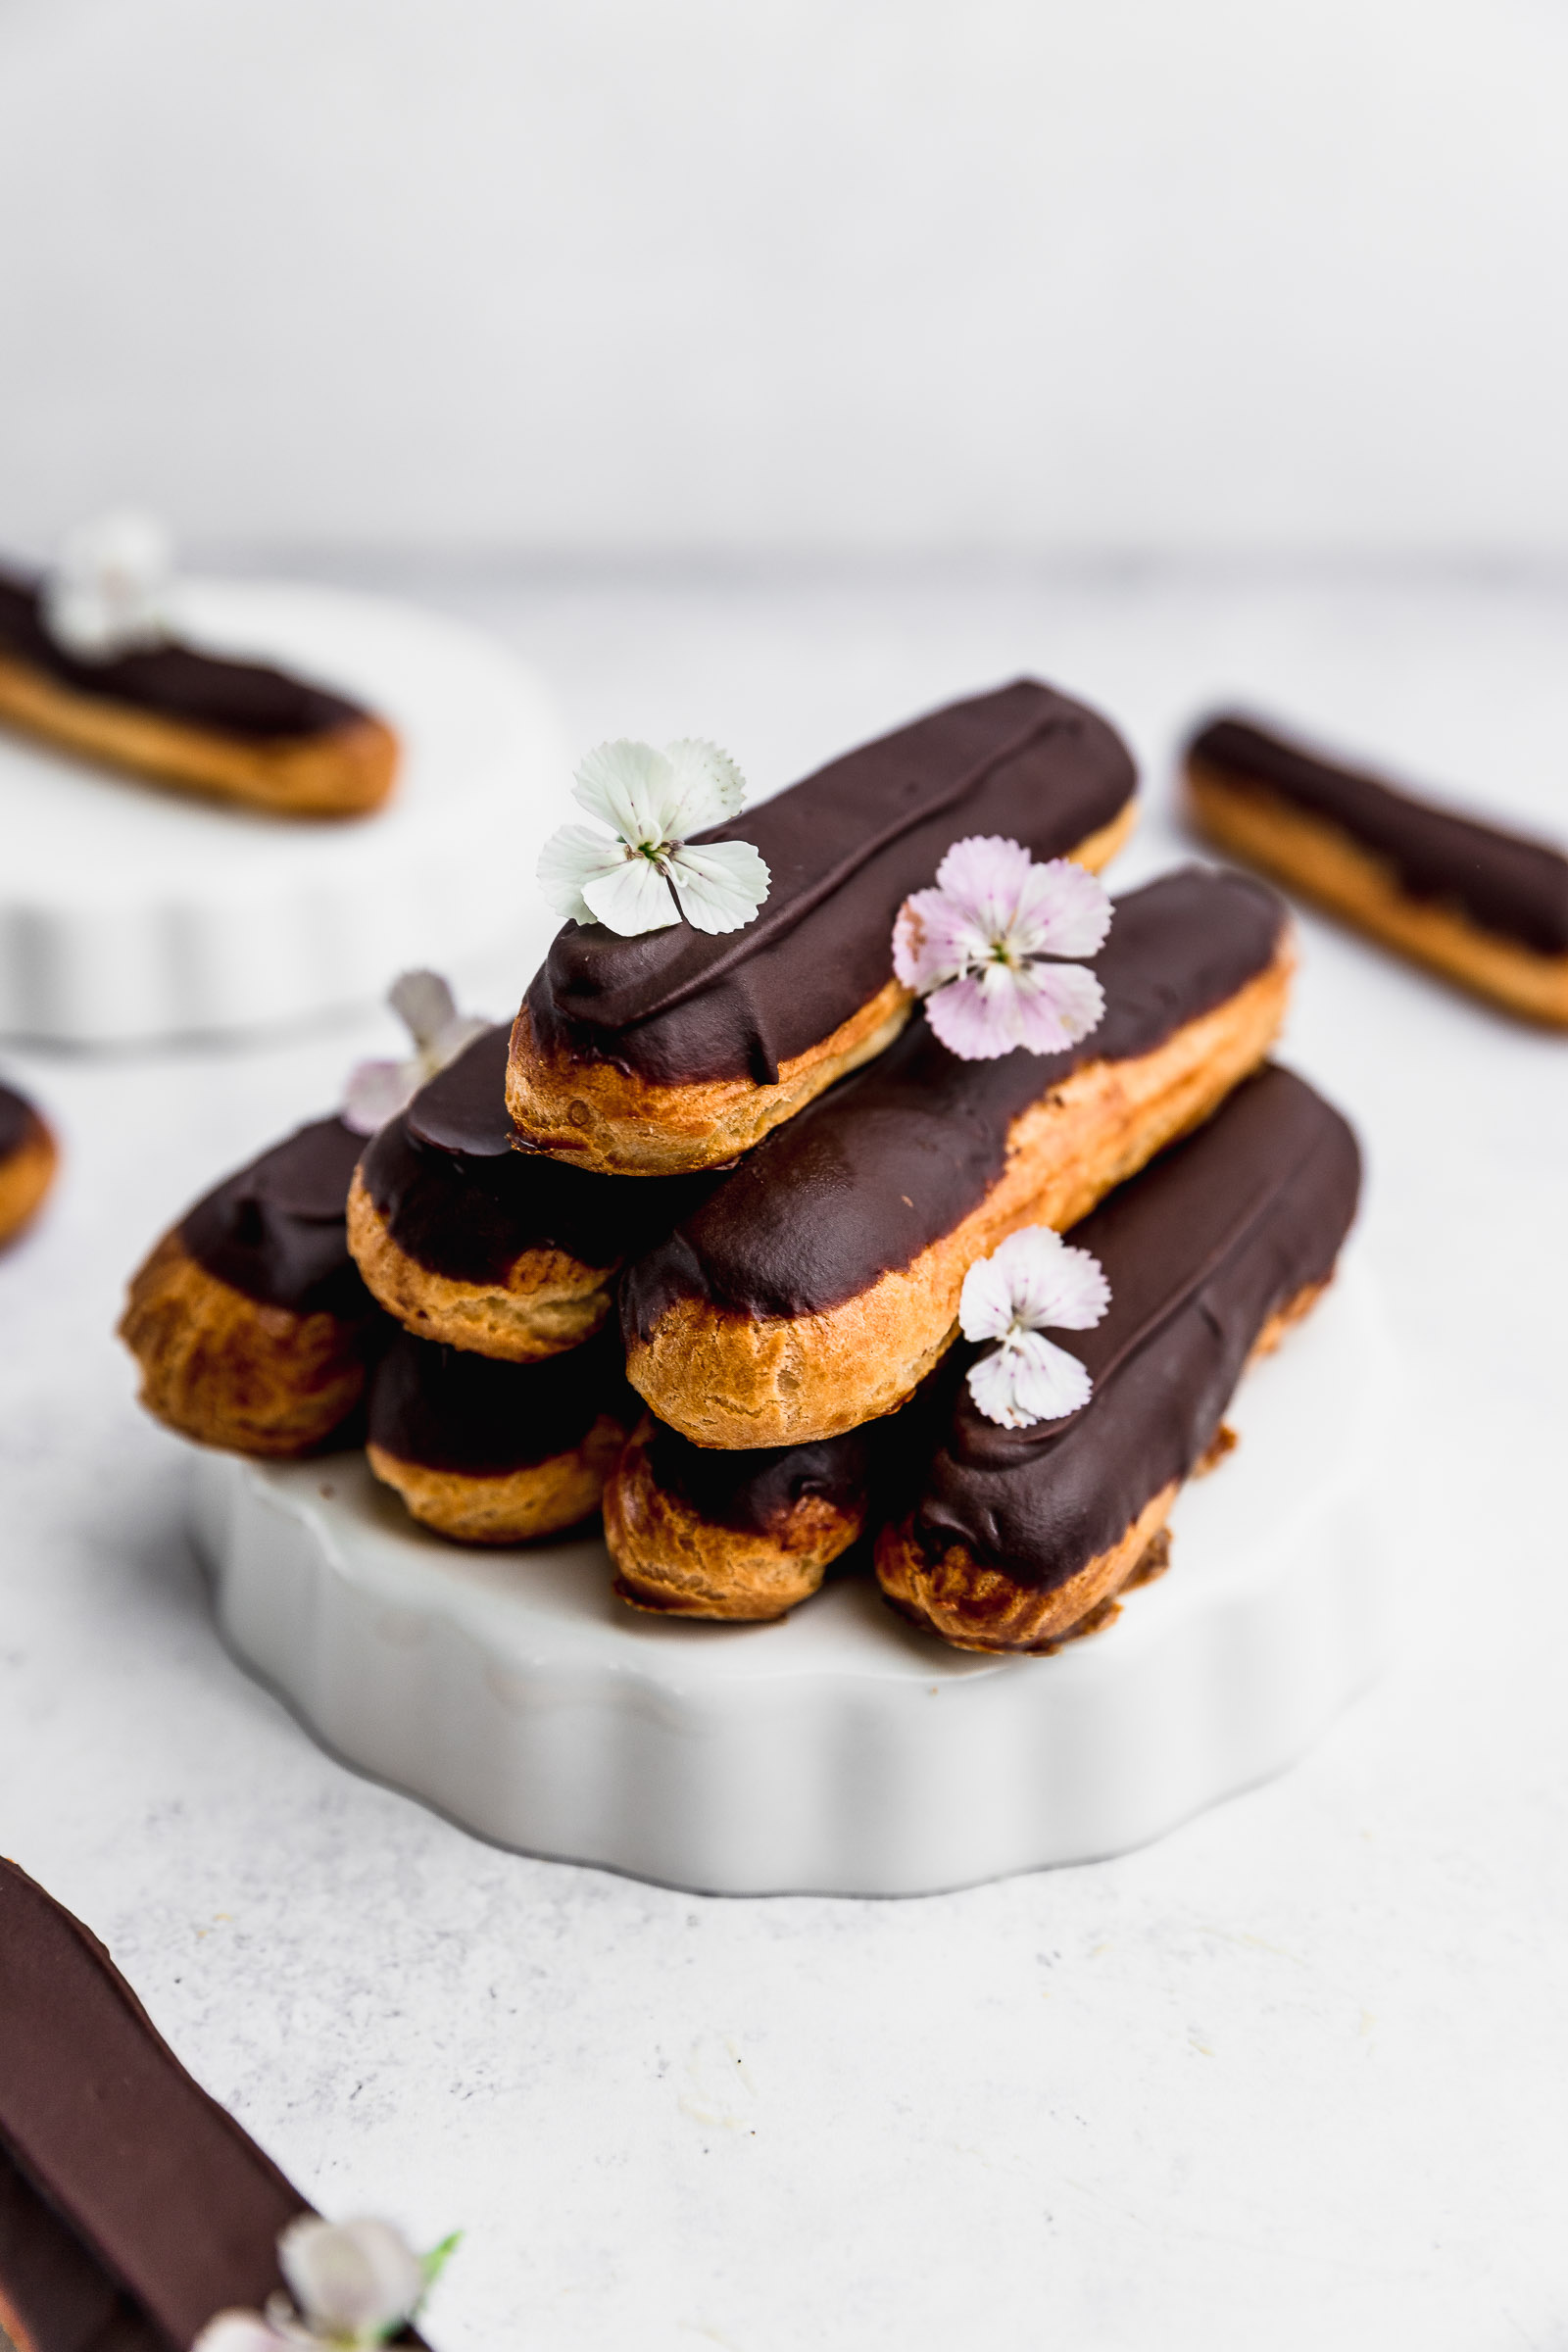 A pyramid of chocolate éclairs with for in the bottom, two on the second layer and one on top. There are also light pink edible flowers on them.